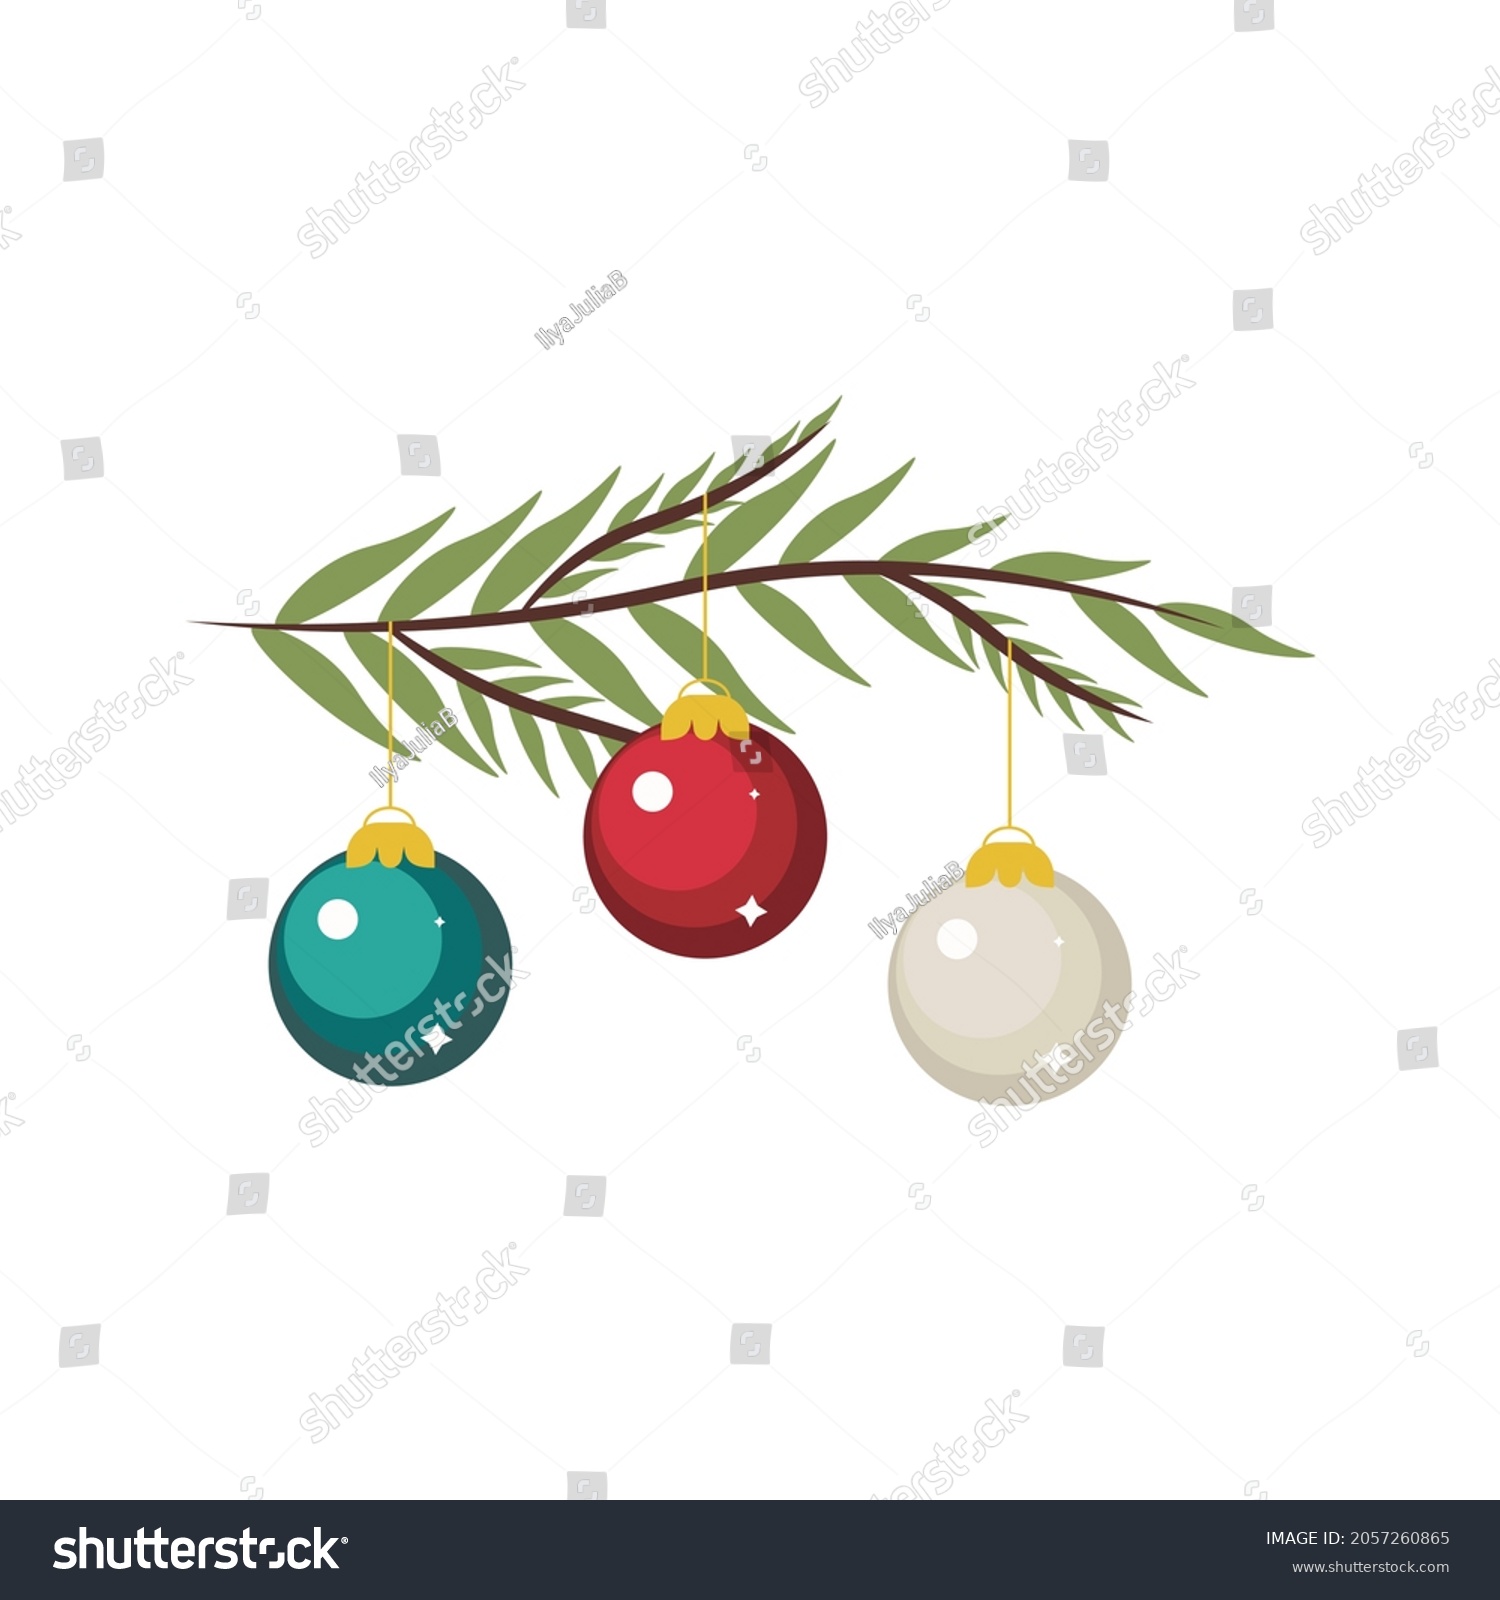  Tree branch  with toys vector illustration #2057260865